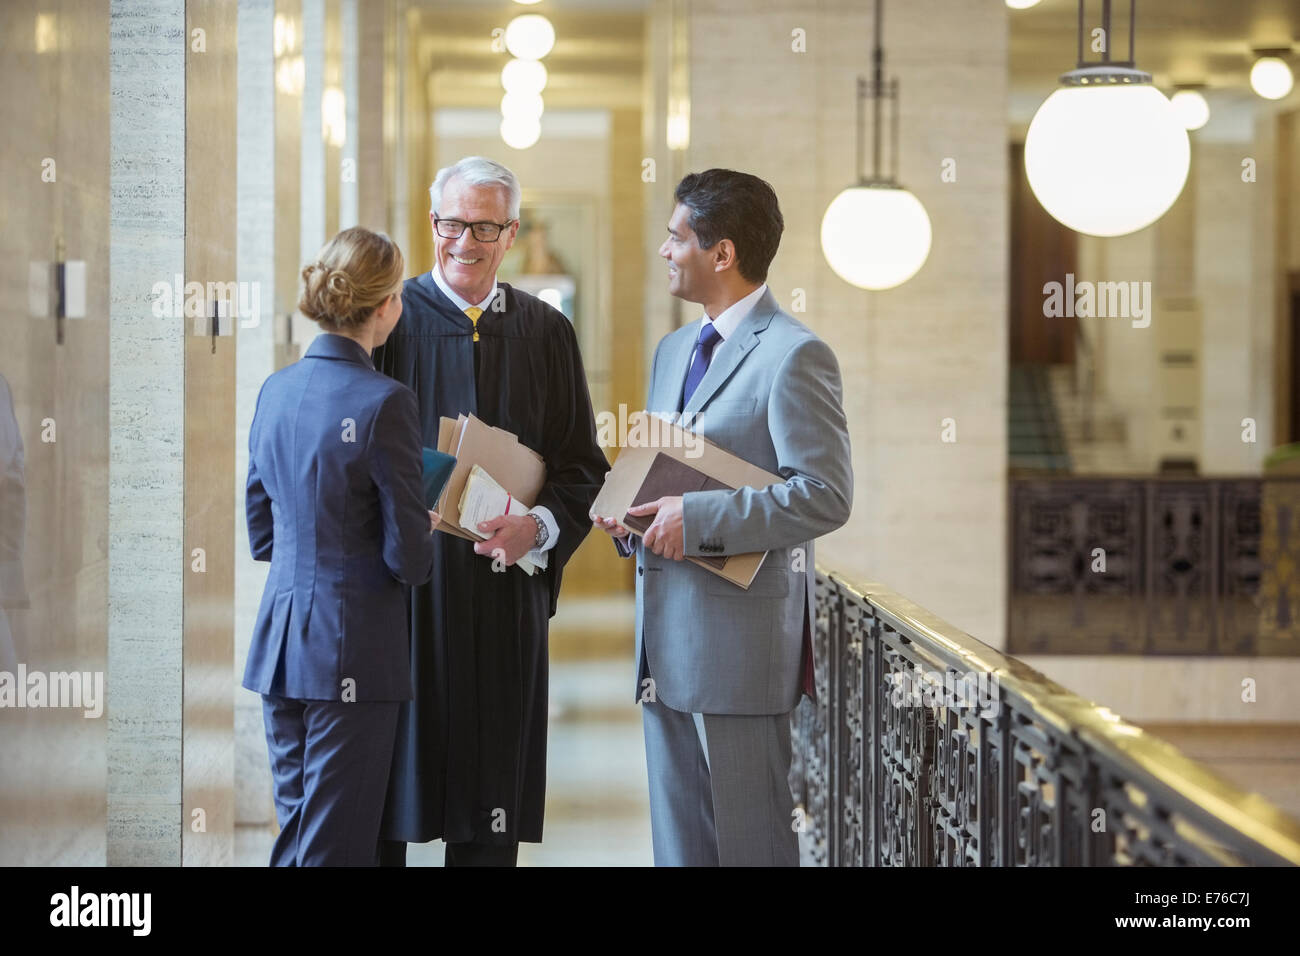 Judge and lawyers talking in courthouse Stock Photo